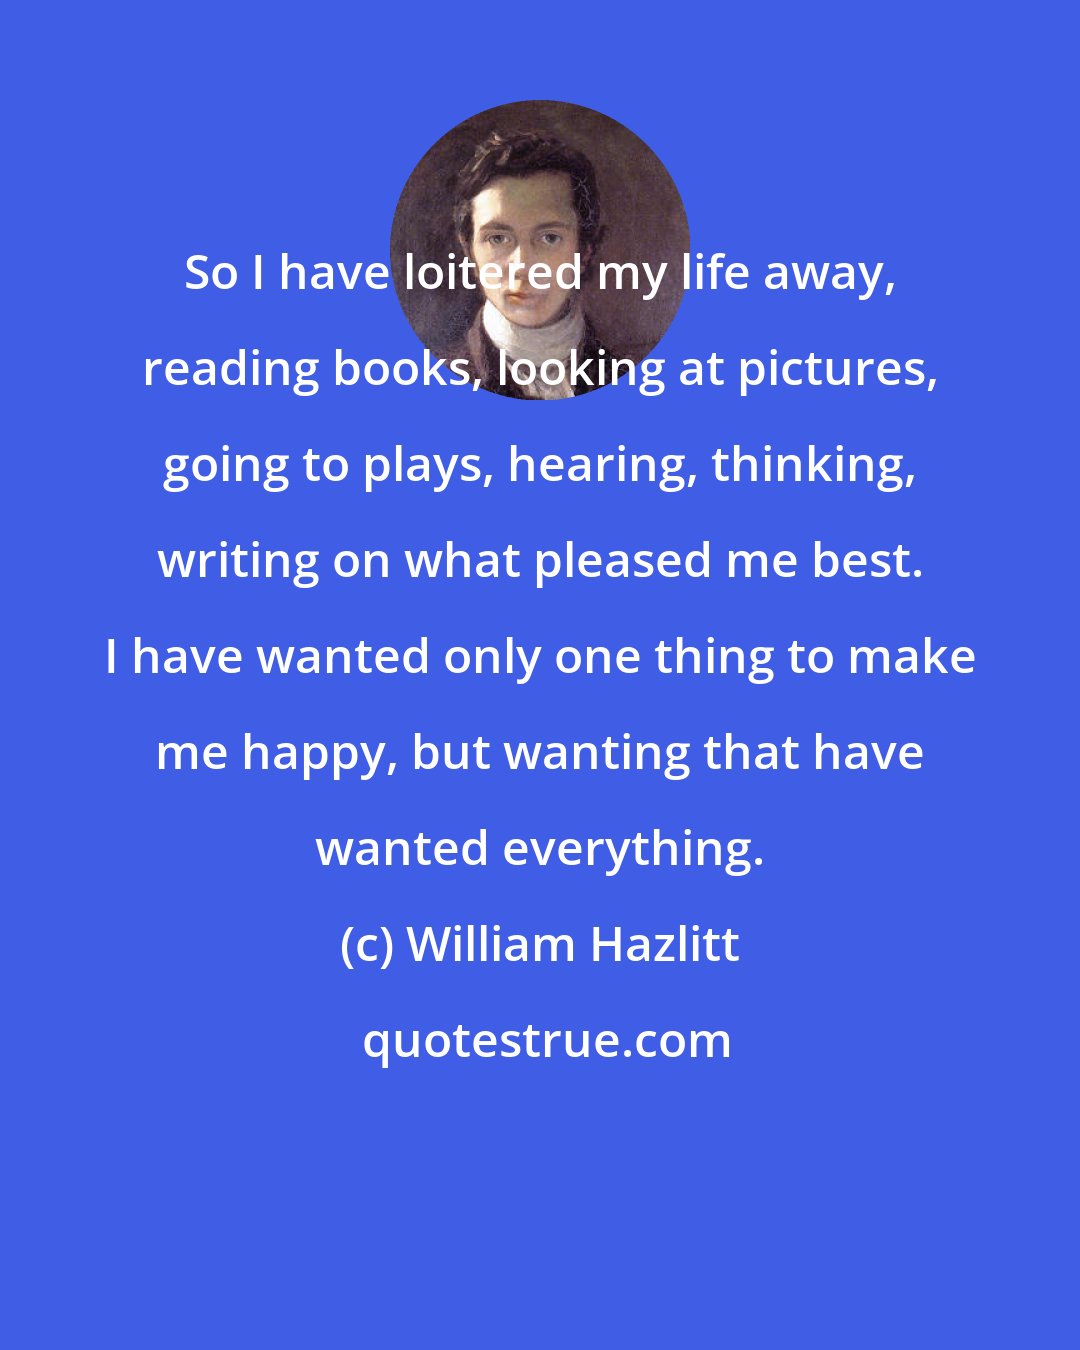 William Hazlitt: So I have loitered my life away, reading books, looking at pictures, going to plays, hearing, thinking, writing on what pleased me best. I have wanted only one thing to make me happy, but wanting that have wanted everything.